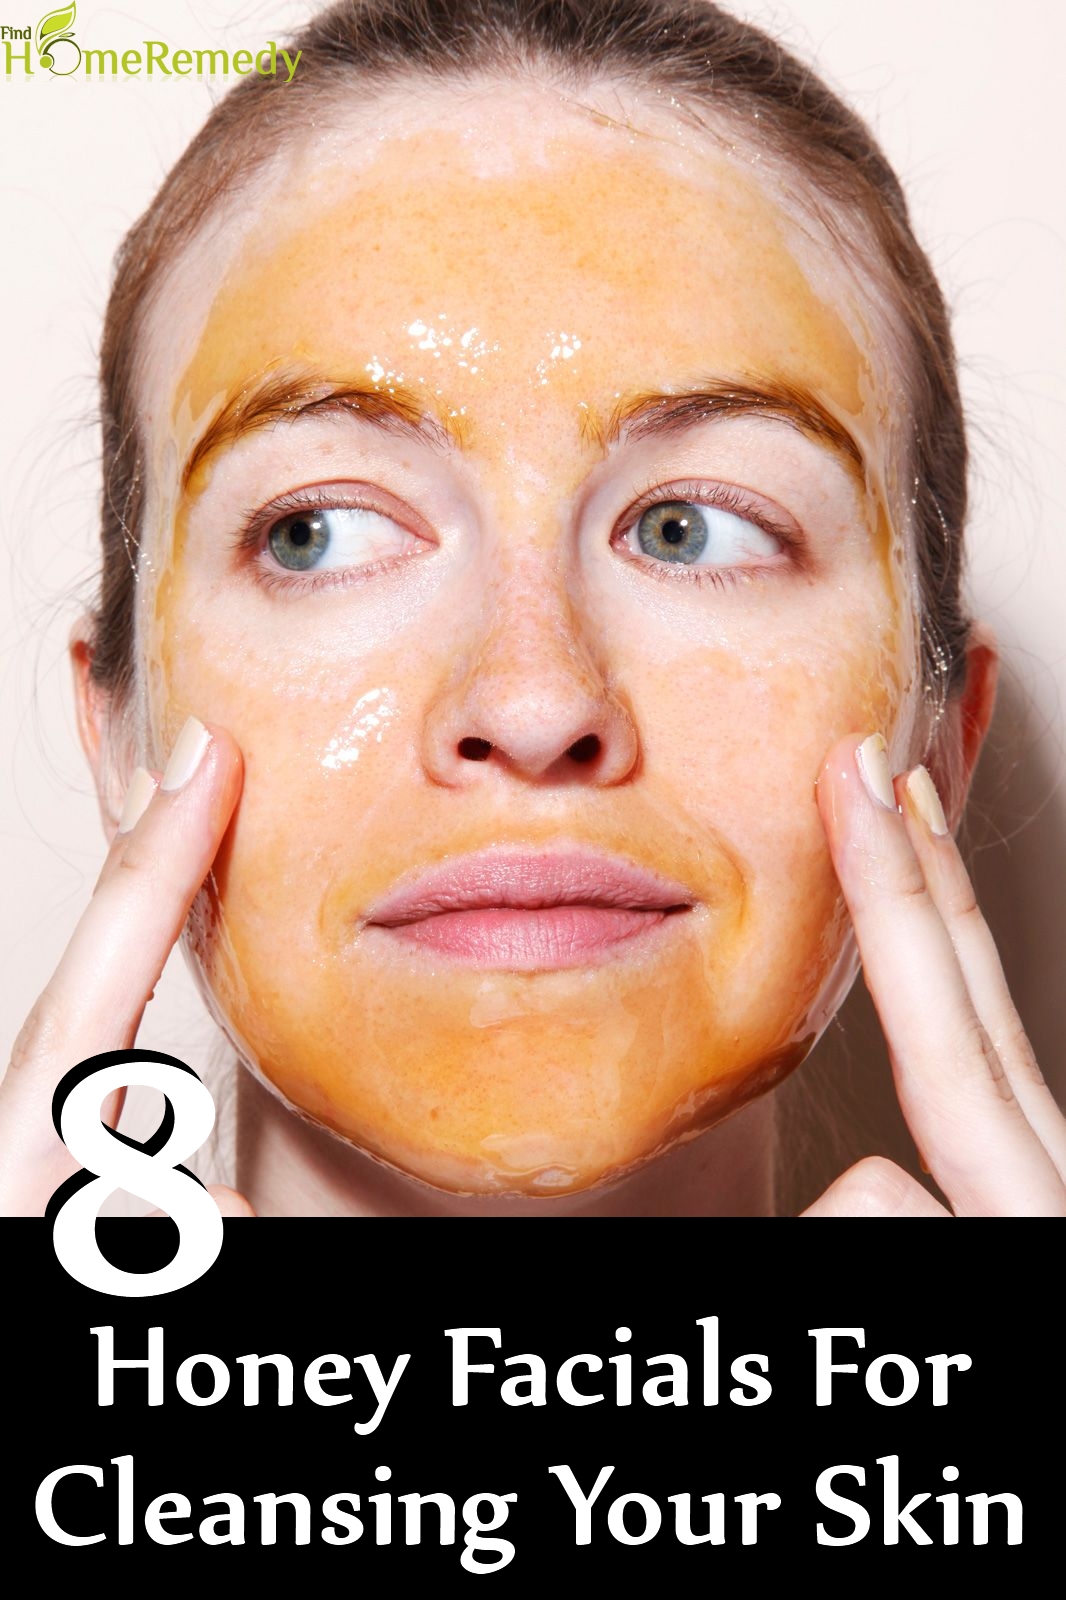 8 Amazing Honey Facials For Cleansing Your Skin | Find Home Remedy ...